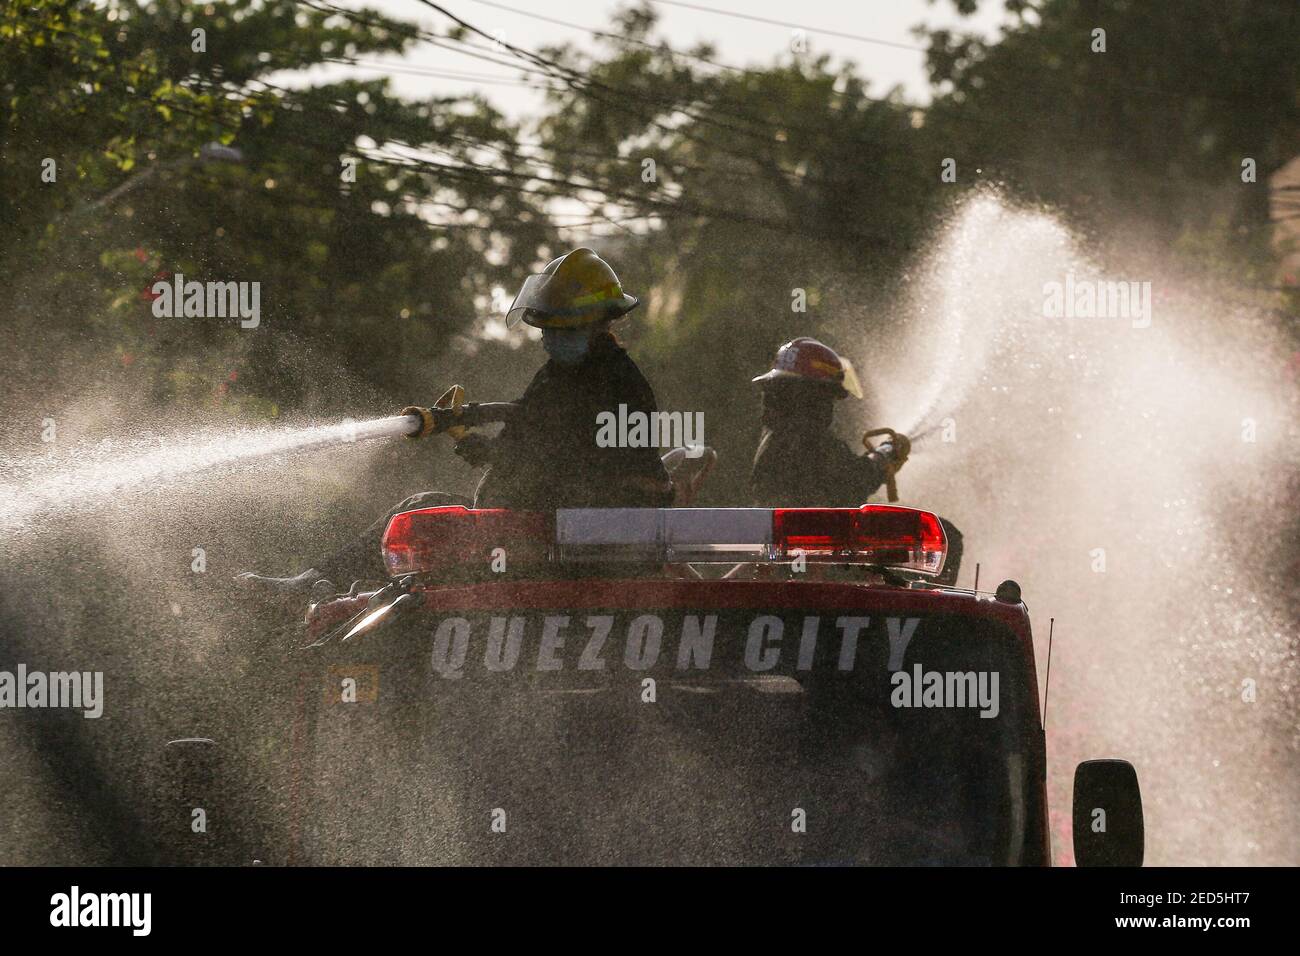 Fireman uses a hoses to spray disinfectant solution along a street to help curb the spread of COVID-19 during the coronavirus lockdown in Manila, Philippines. Stock Photo